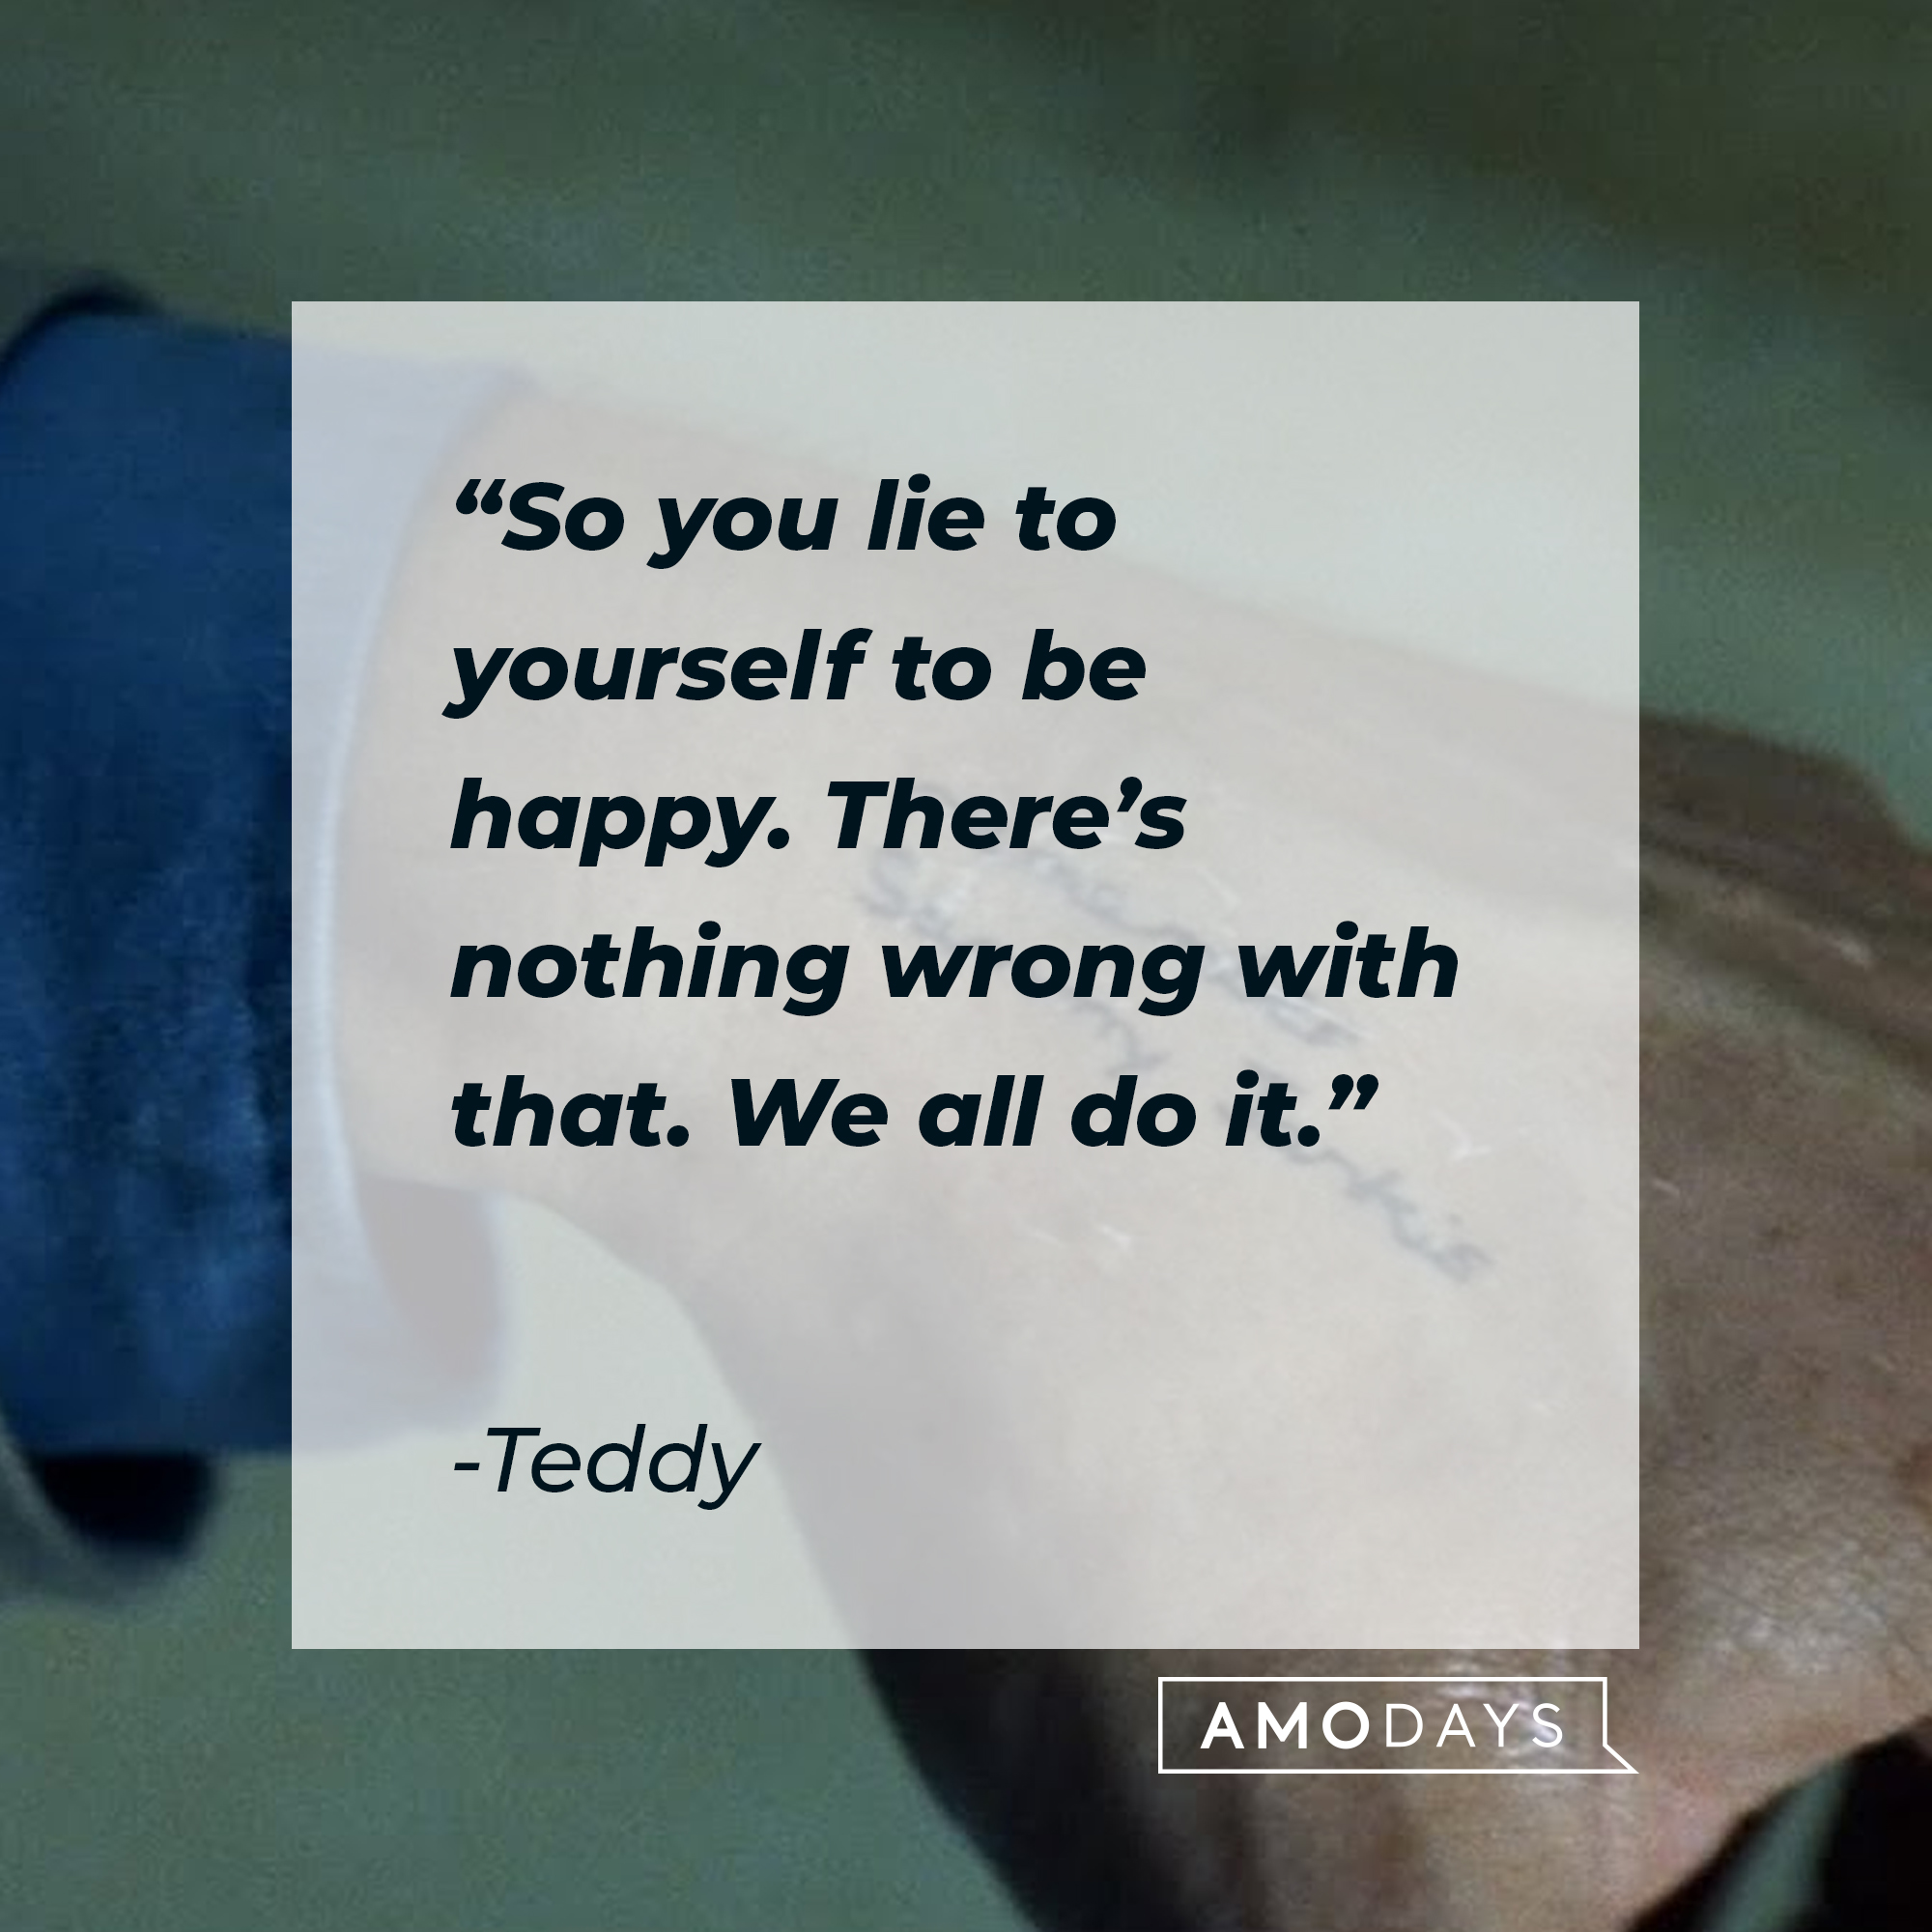 Teddy's quote: "So you lie to yourself to be happy. There's nothing wrong with that. We all do it." | Source: facebook.com/MementoOfficial